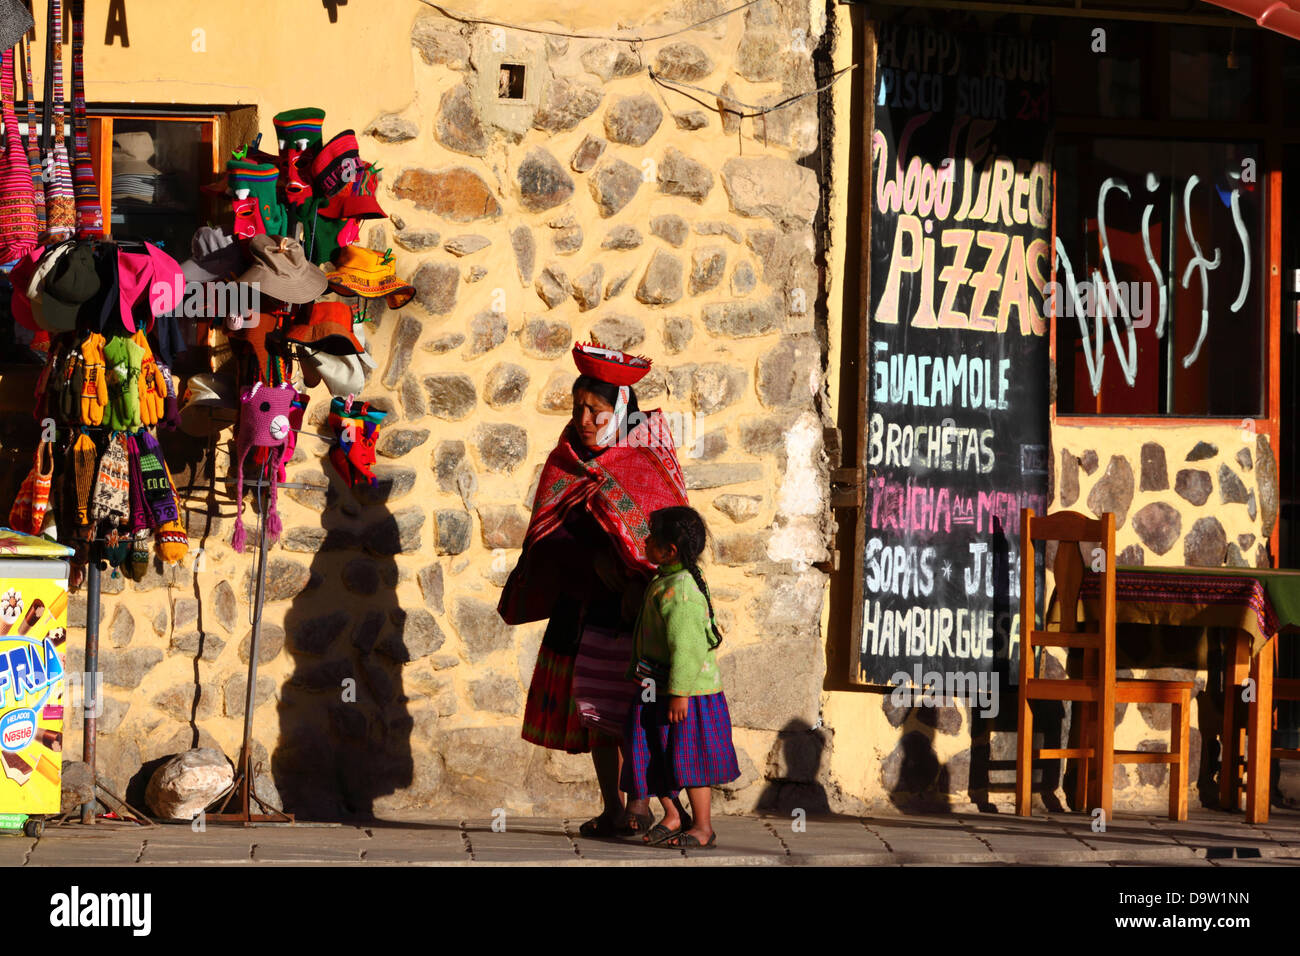 Local indigenous lady wearing traditional dress and girl walking past souvenir shop and cafe menu, Ollantaytambo, Sacred Valley, near Cusco, Peru Stock Photo